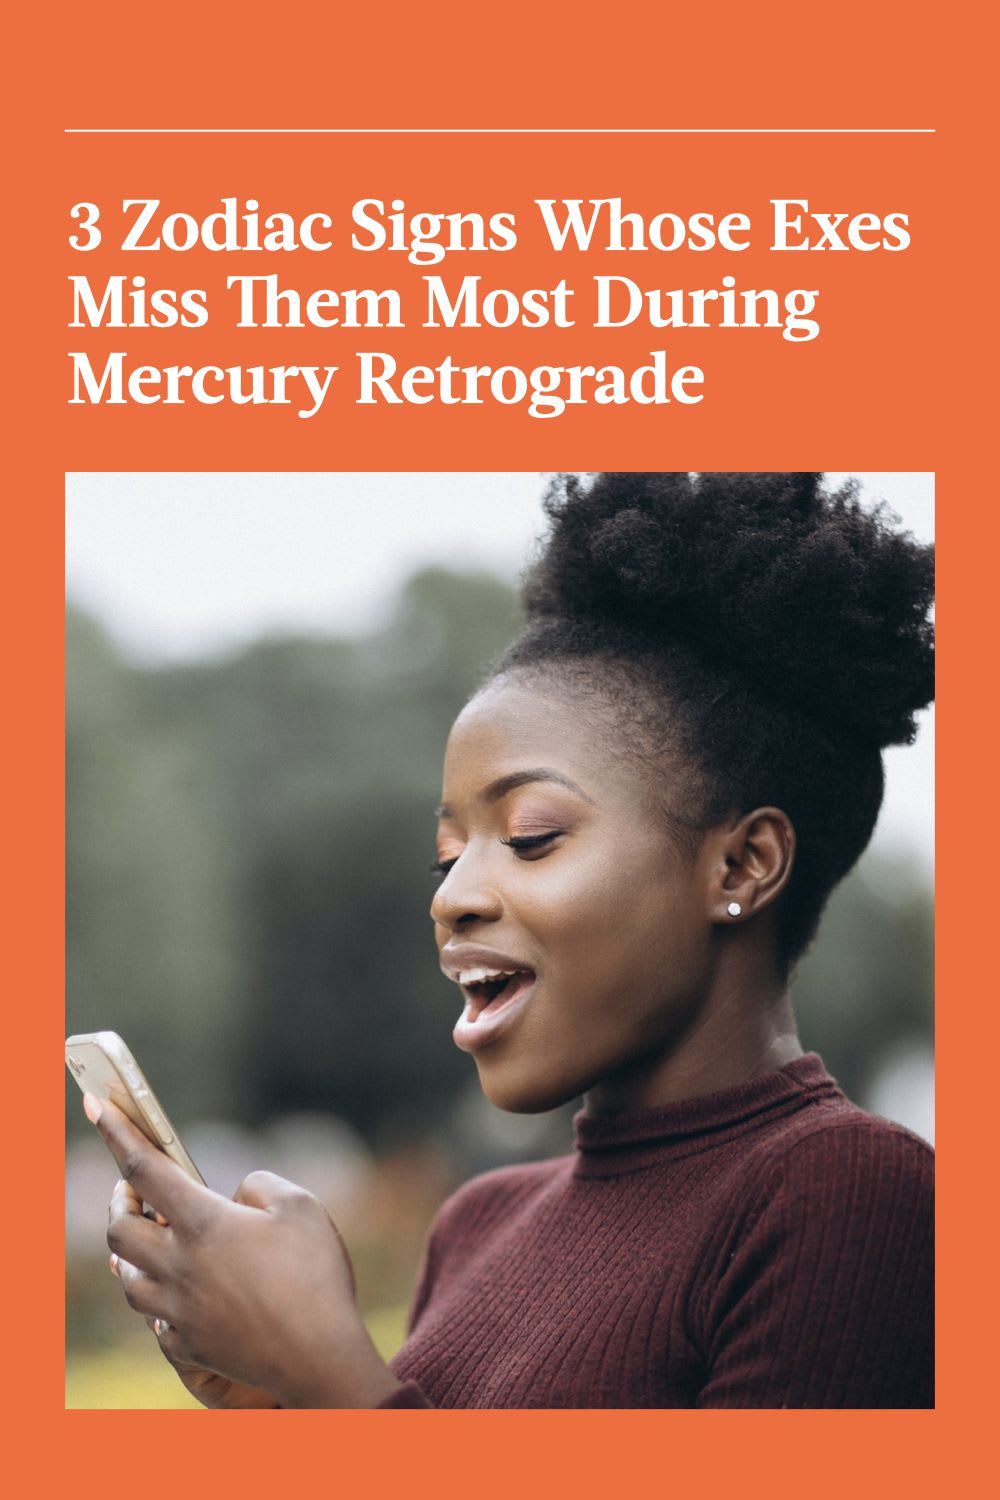 3 Zodiac Signs Whose Exes Miss Them Most During Mercury Retrograde